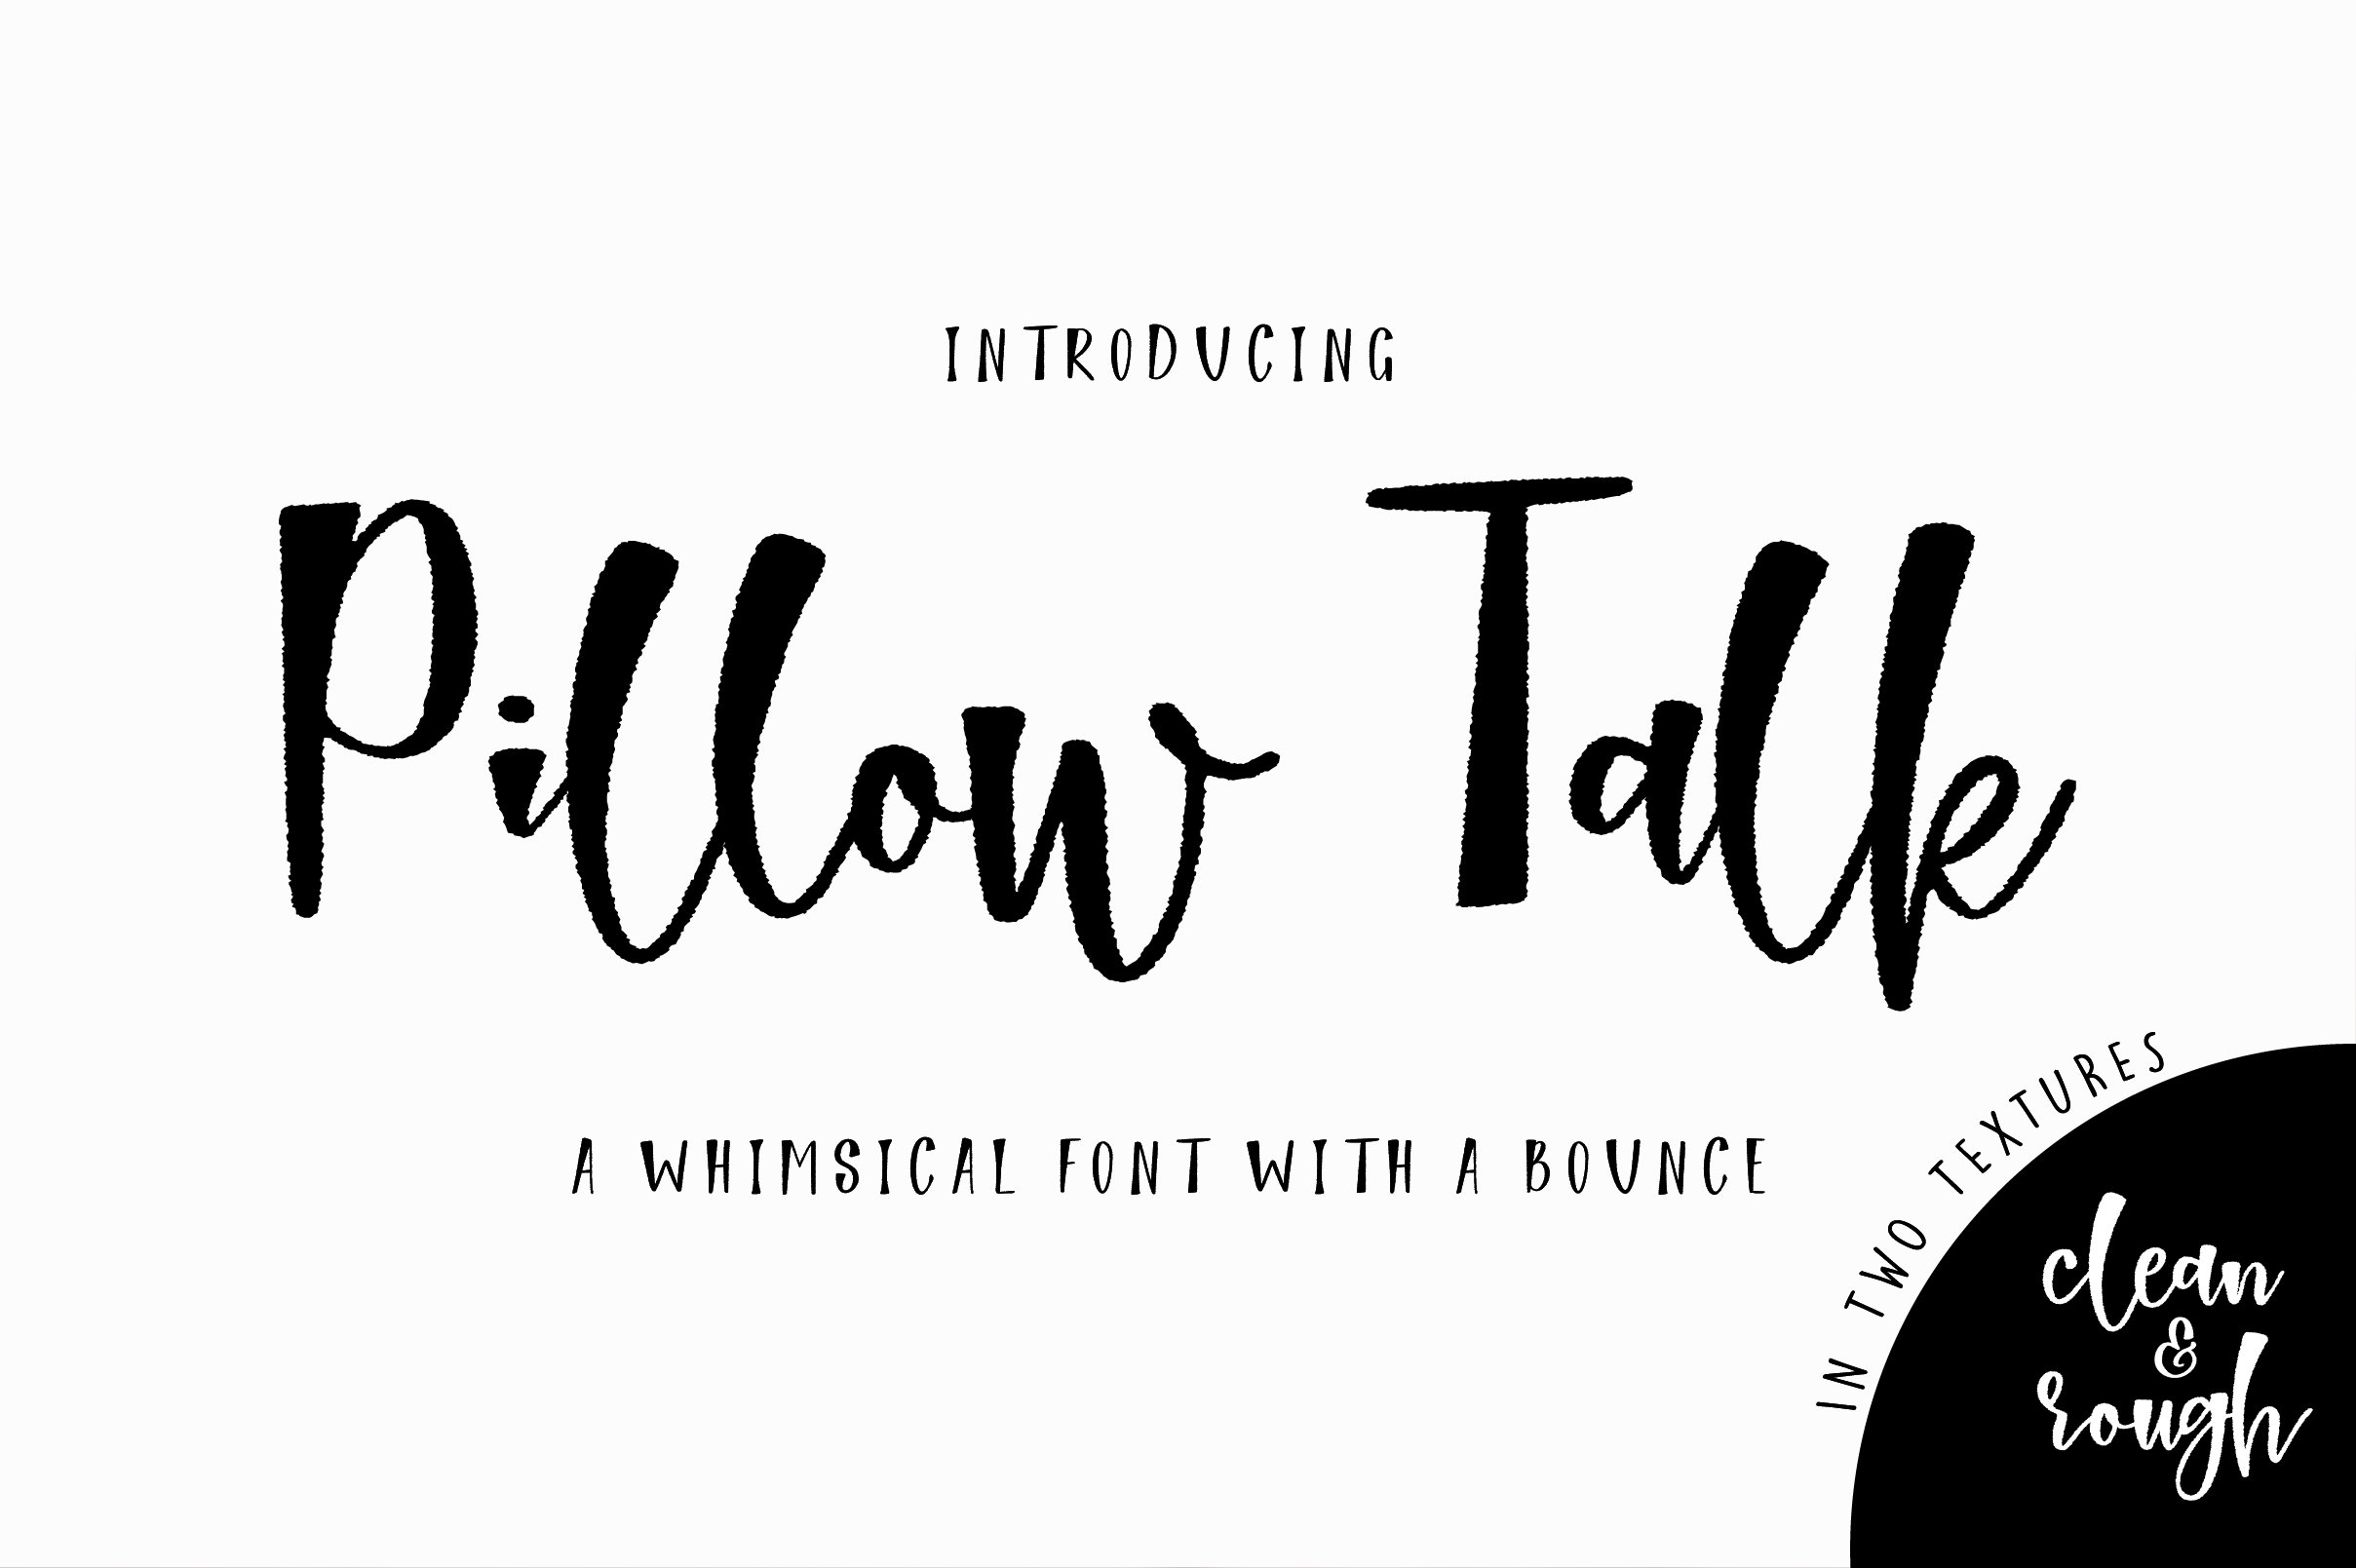 Pillow Talk Font cover image.